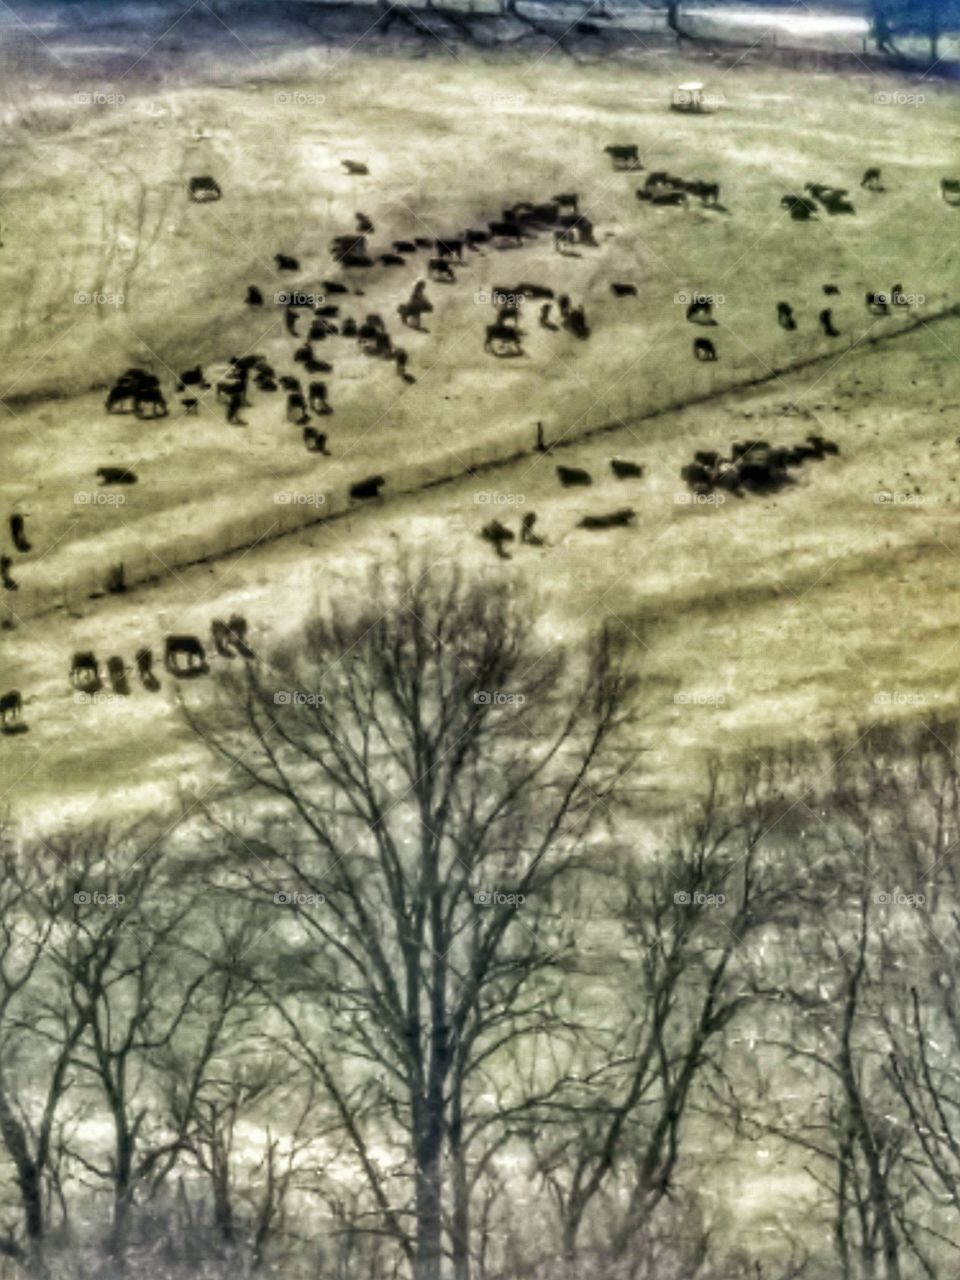 Cows in a field along the Little Niangua river, Missouri.